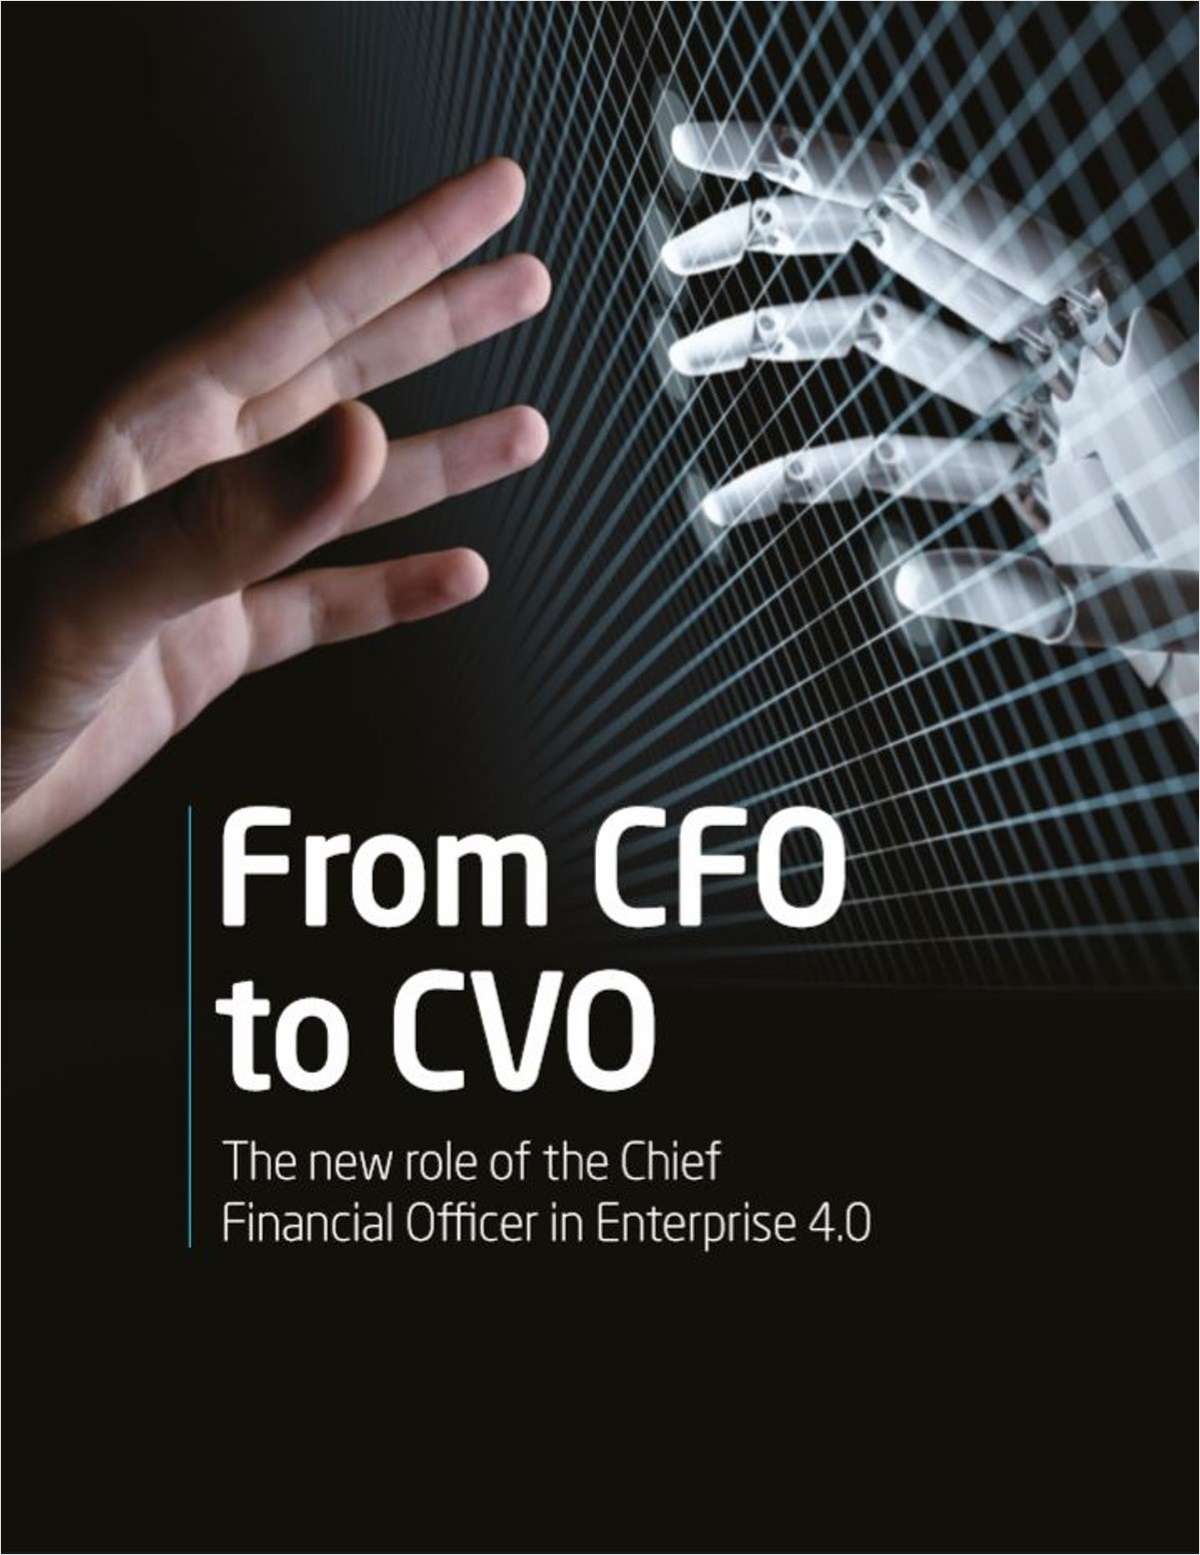 The New Role of the Chief Financial Officer in Enterprise 4.0